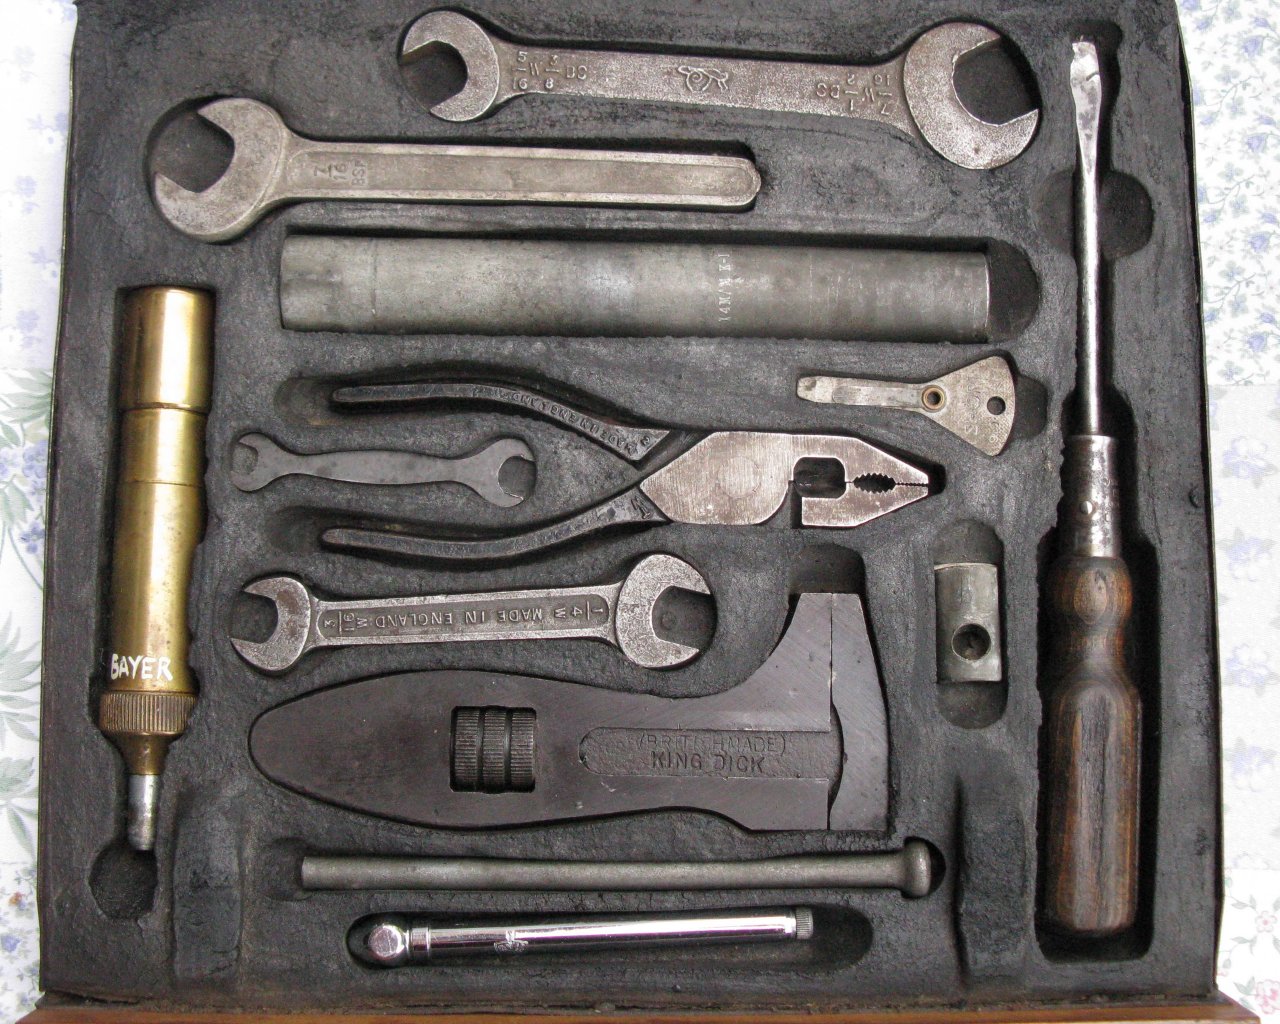 Chas Rover 75 Toolkit   1955 Model